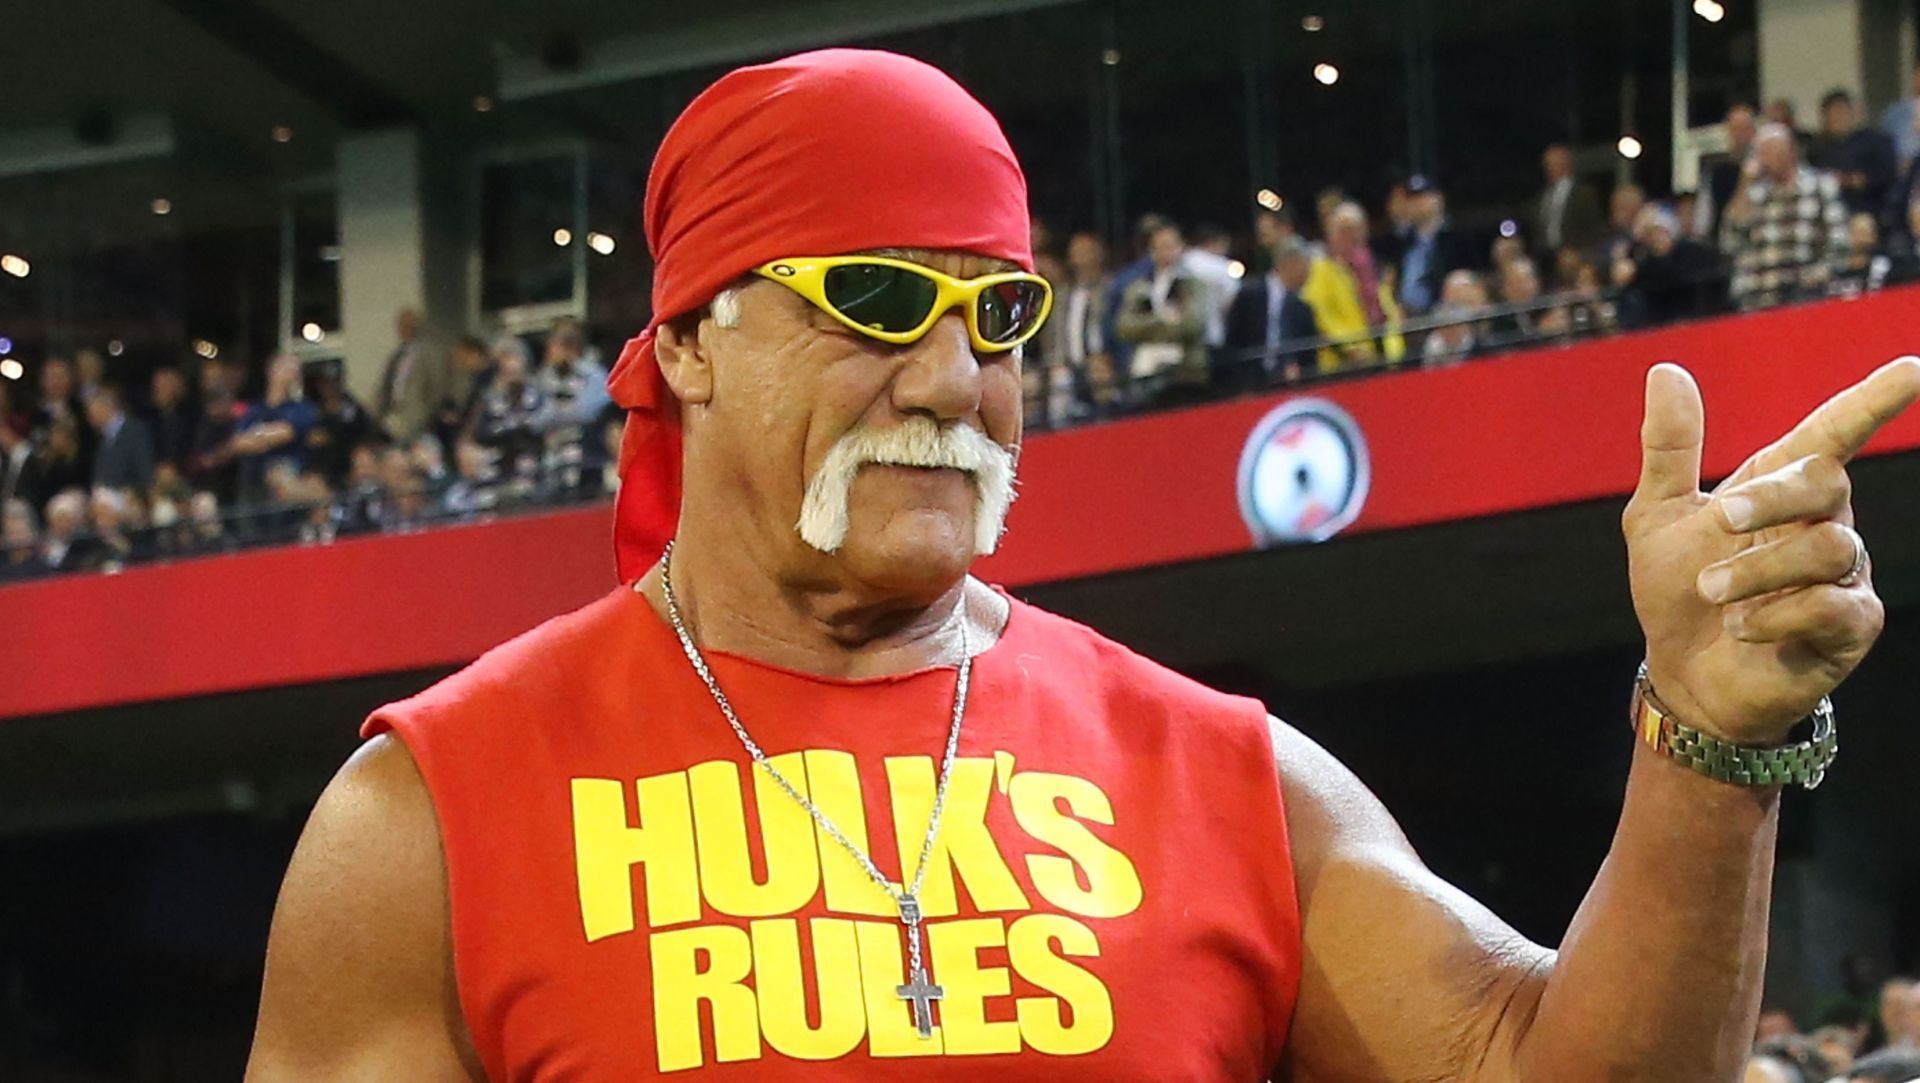 Hulk Hogan told DDP he had a long way to go in pro wrestling two decades ago